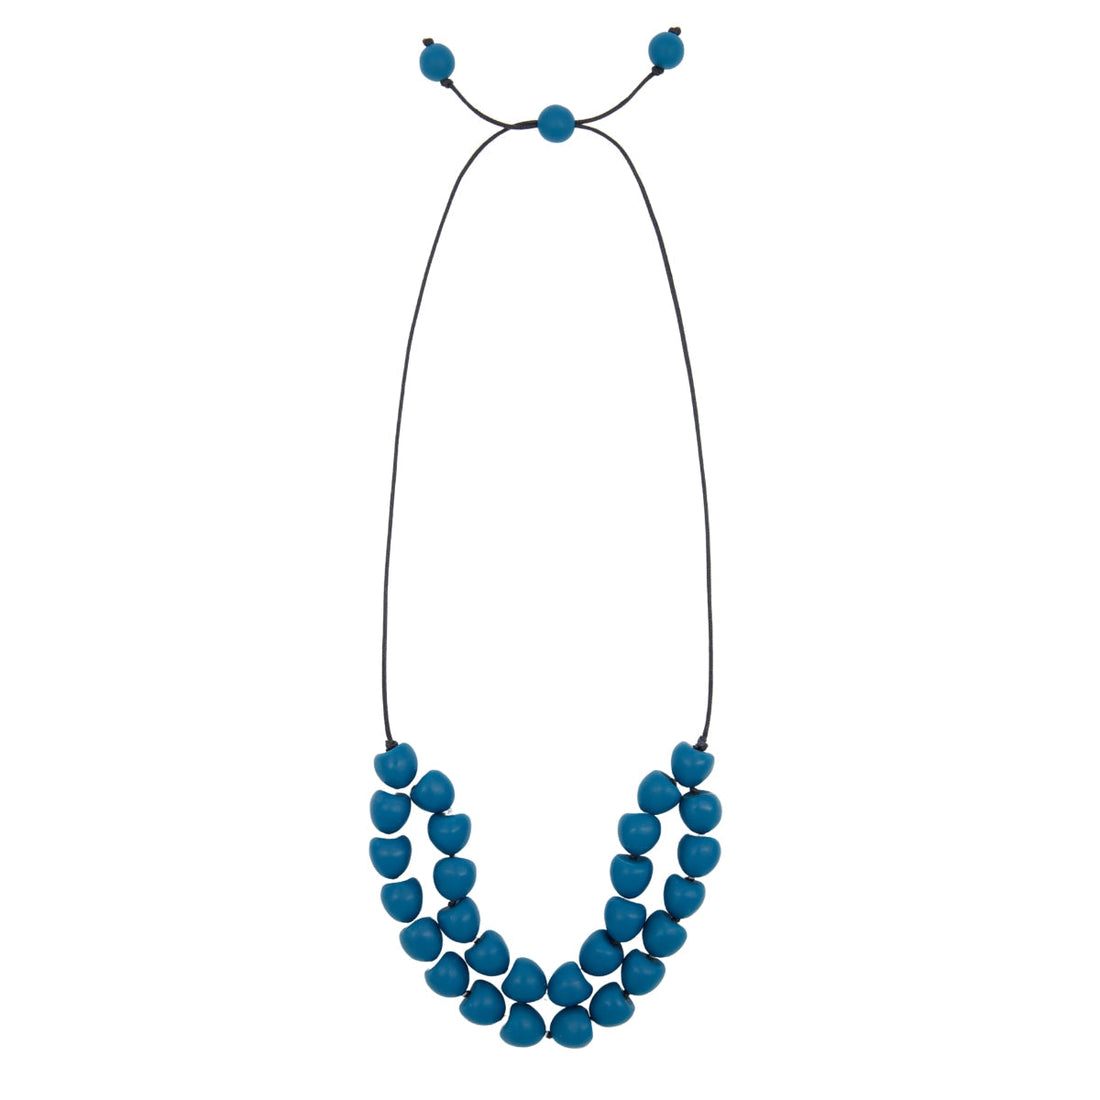 Tradewind Double Strand Pod Necklace in Deep Teal - IMPERFECT